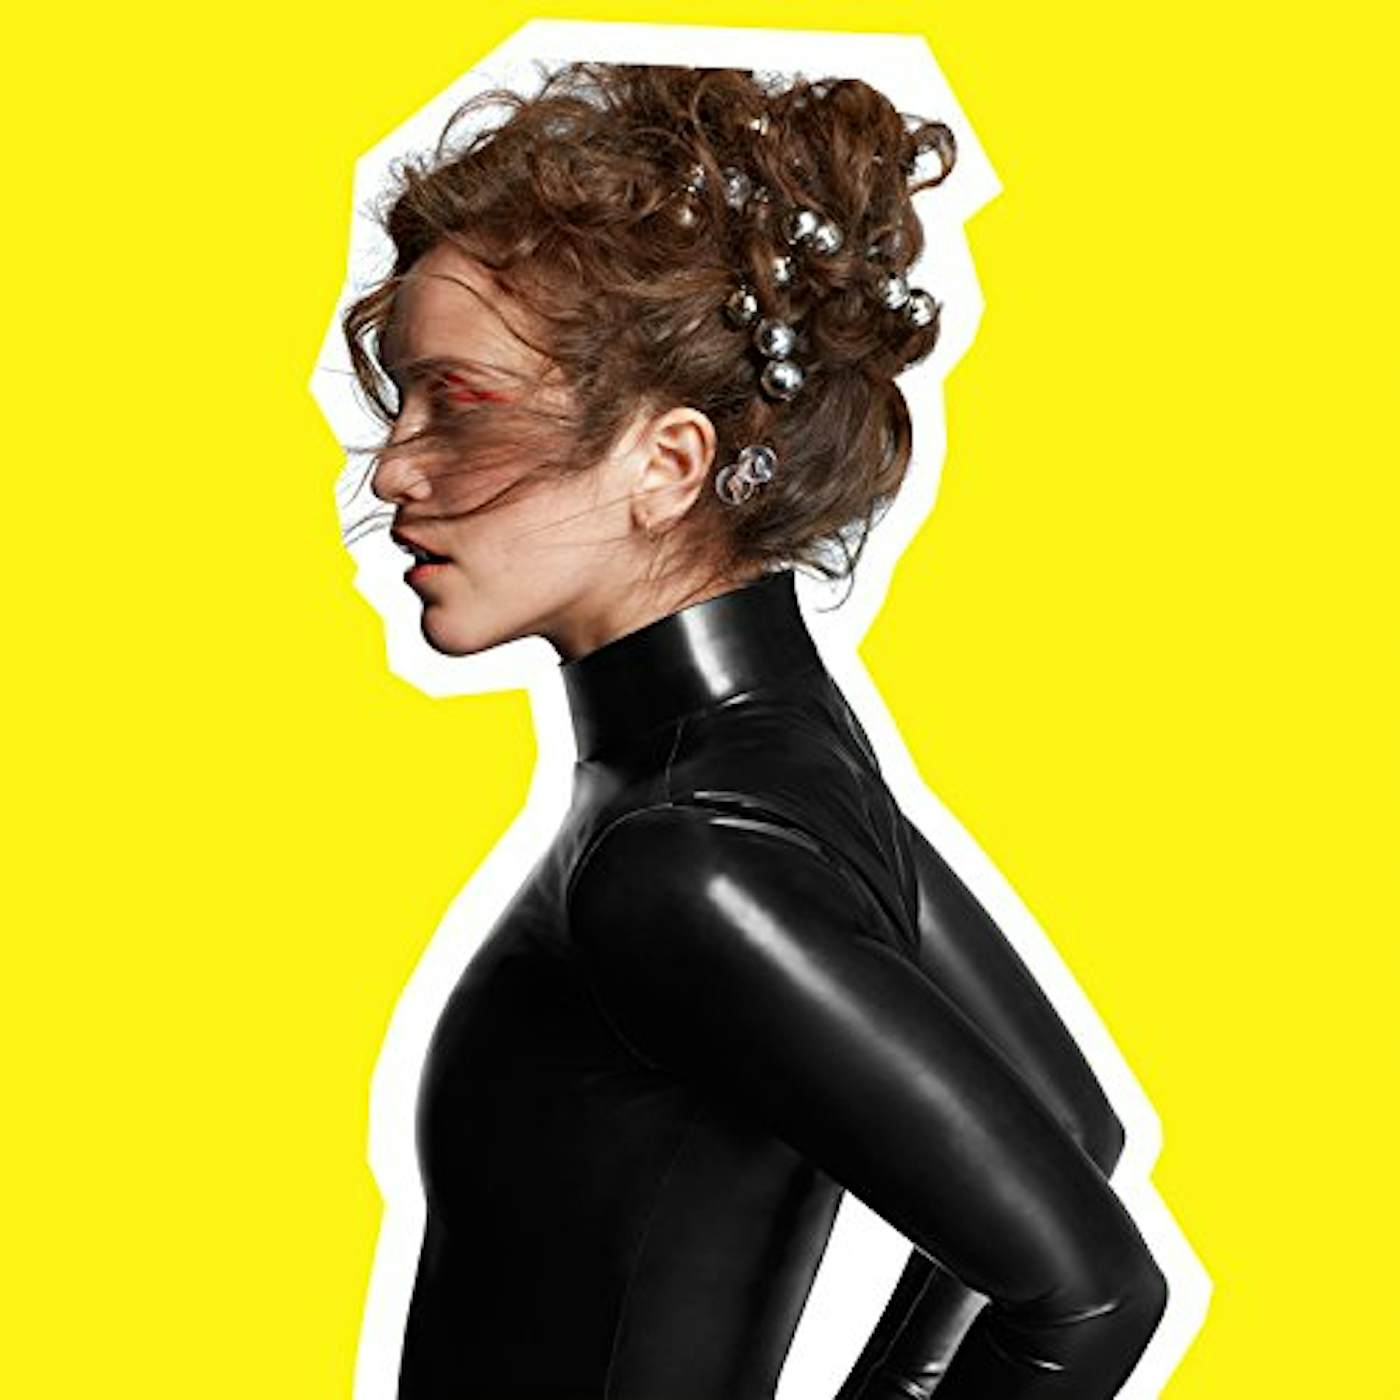 Rae Morris SOMEONE OUT THERE CD